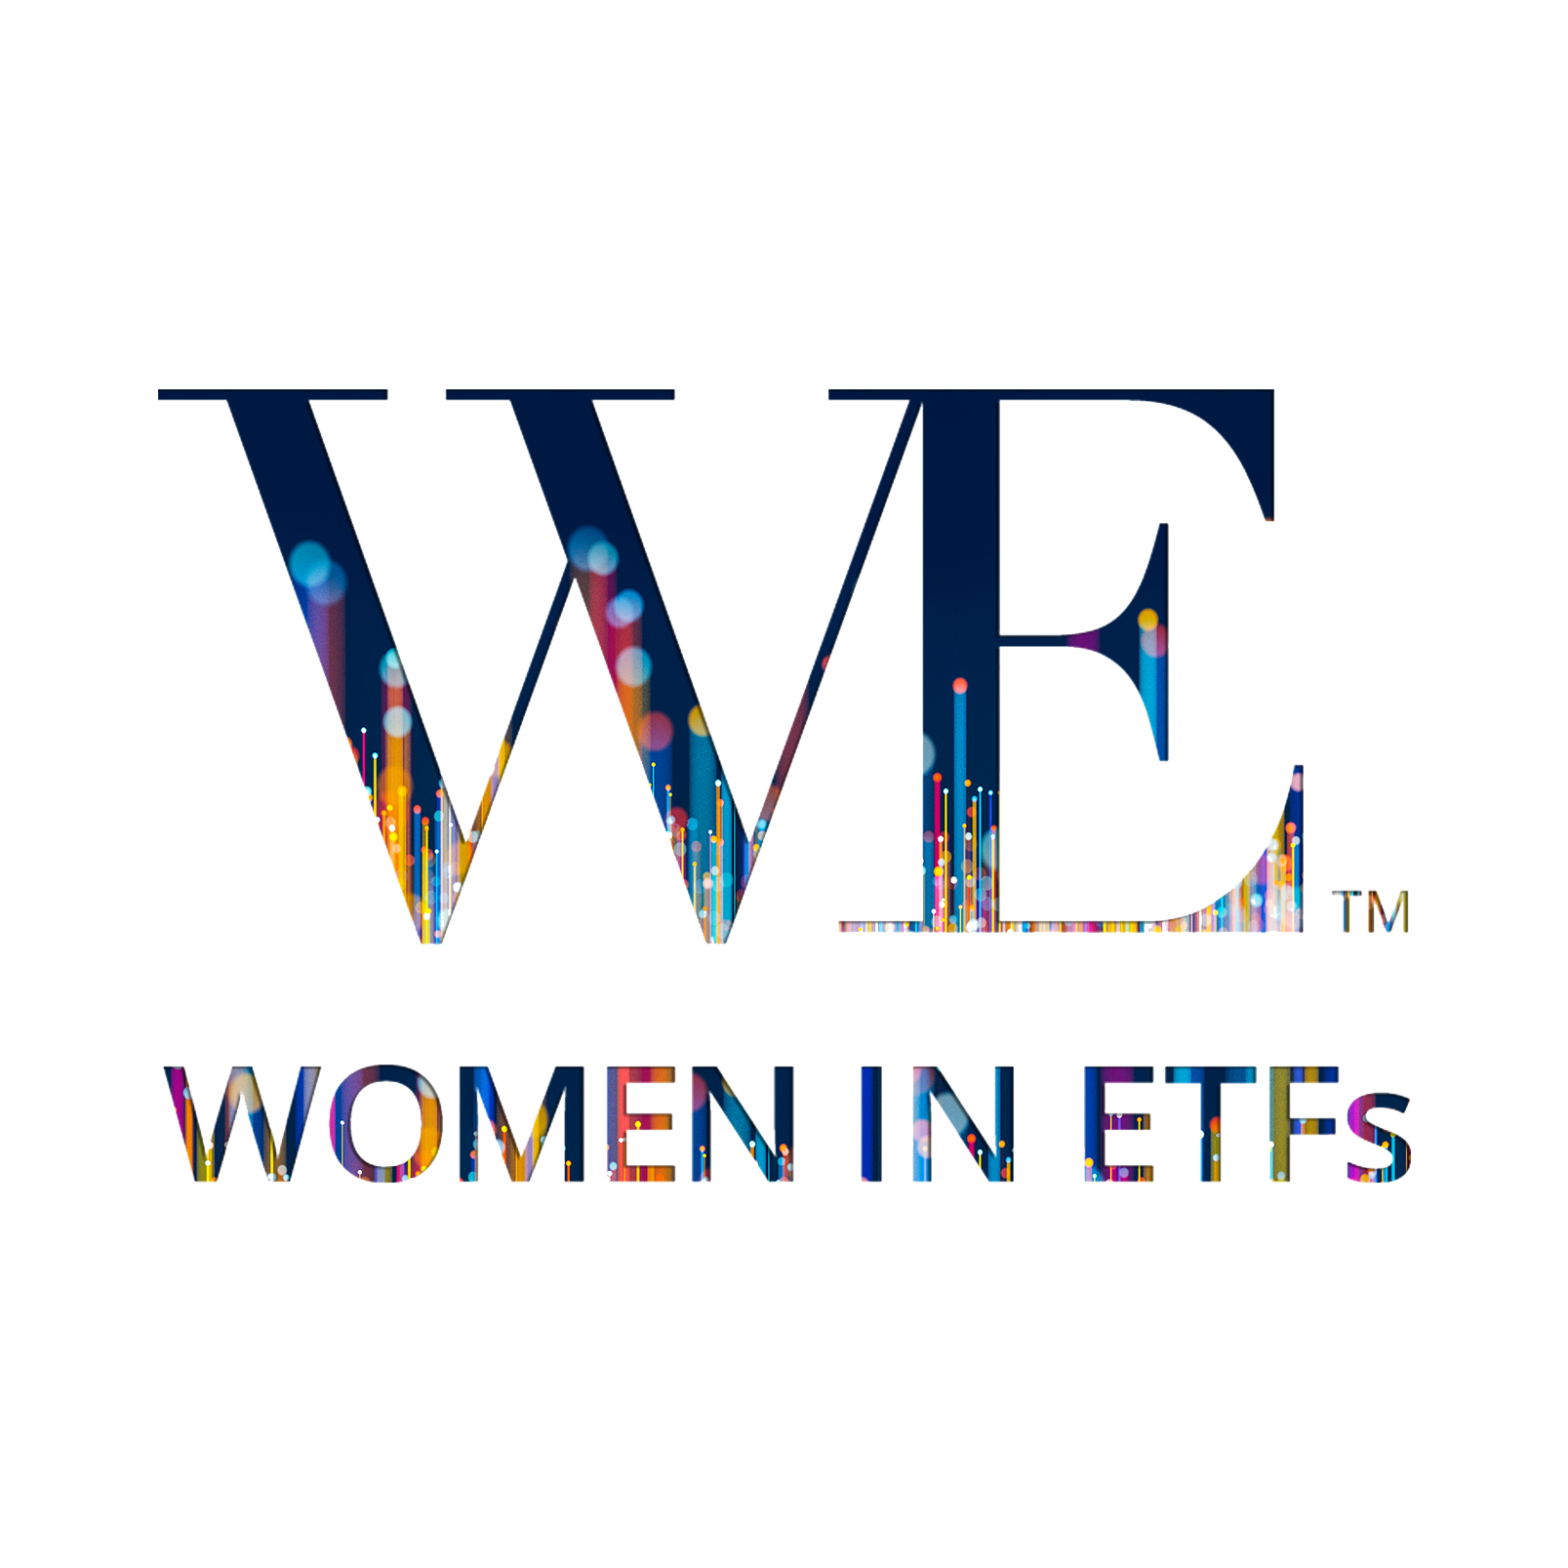 Women in ETFs conference to take place on 26-27 January